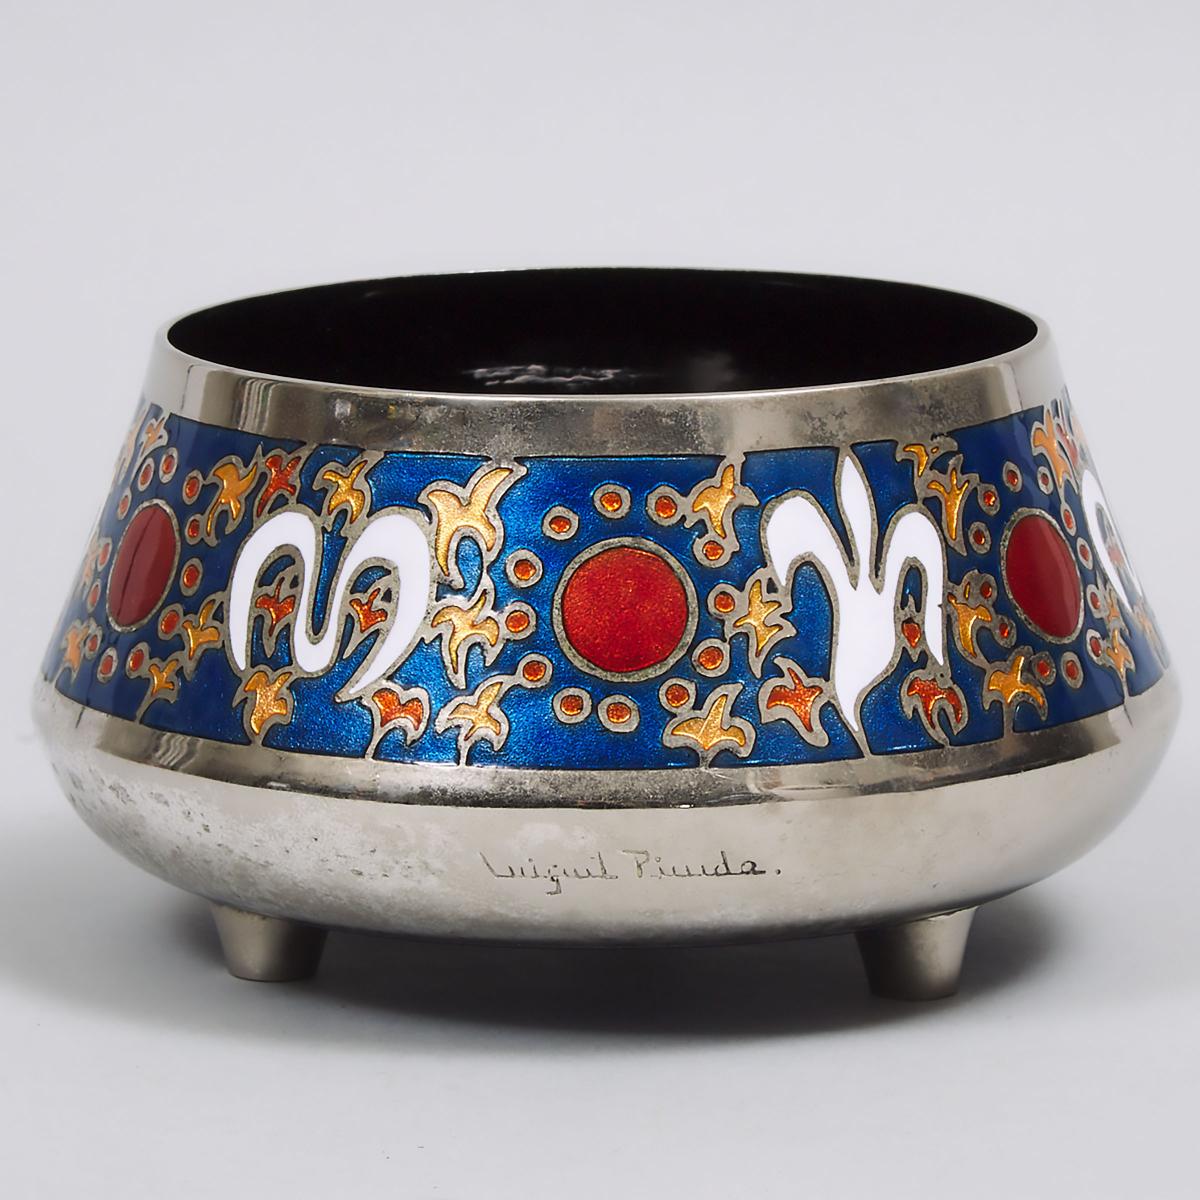 Miguel Pineda Enamelled and Nickelled Copper Footed Bowl, Mexico, mid 20th century, height 3.9 in —